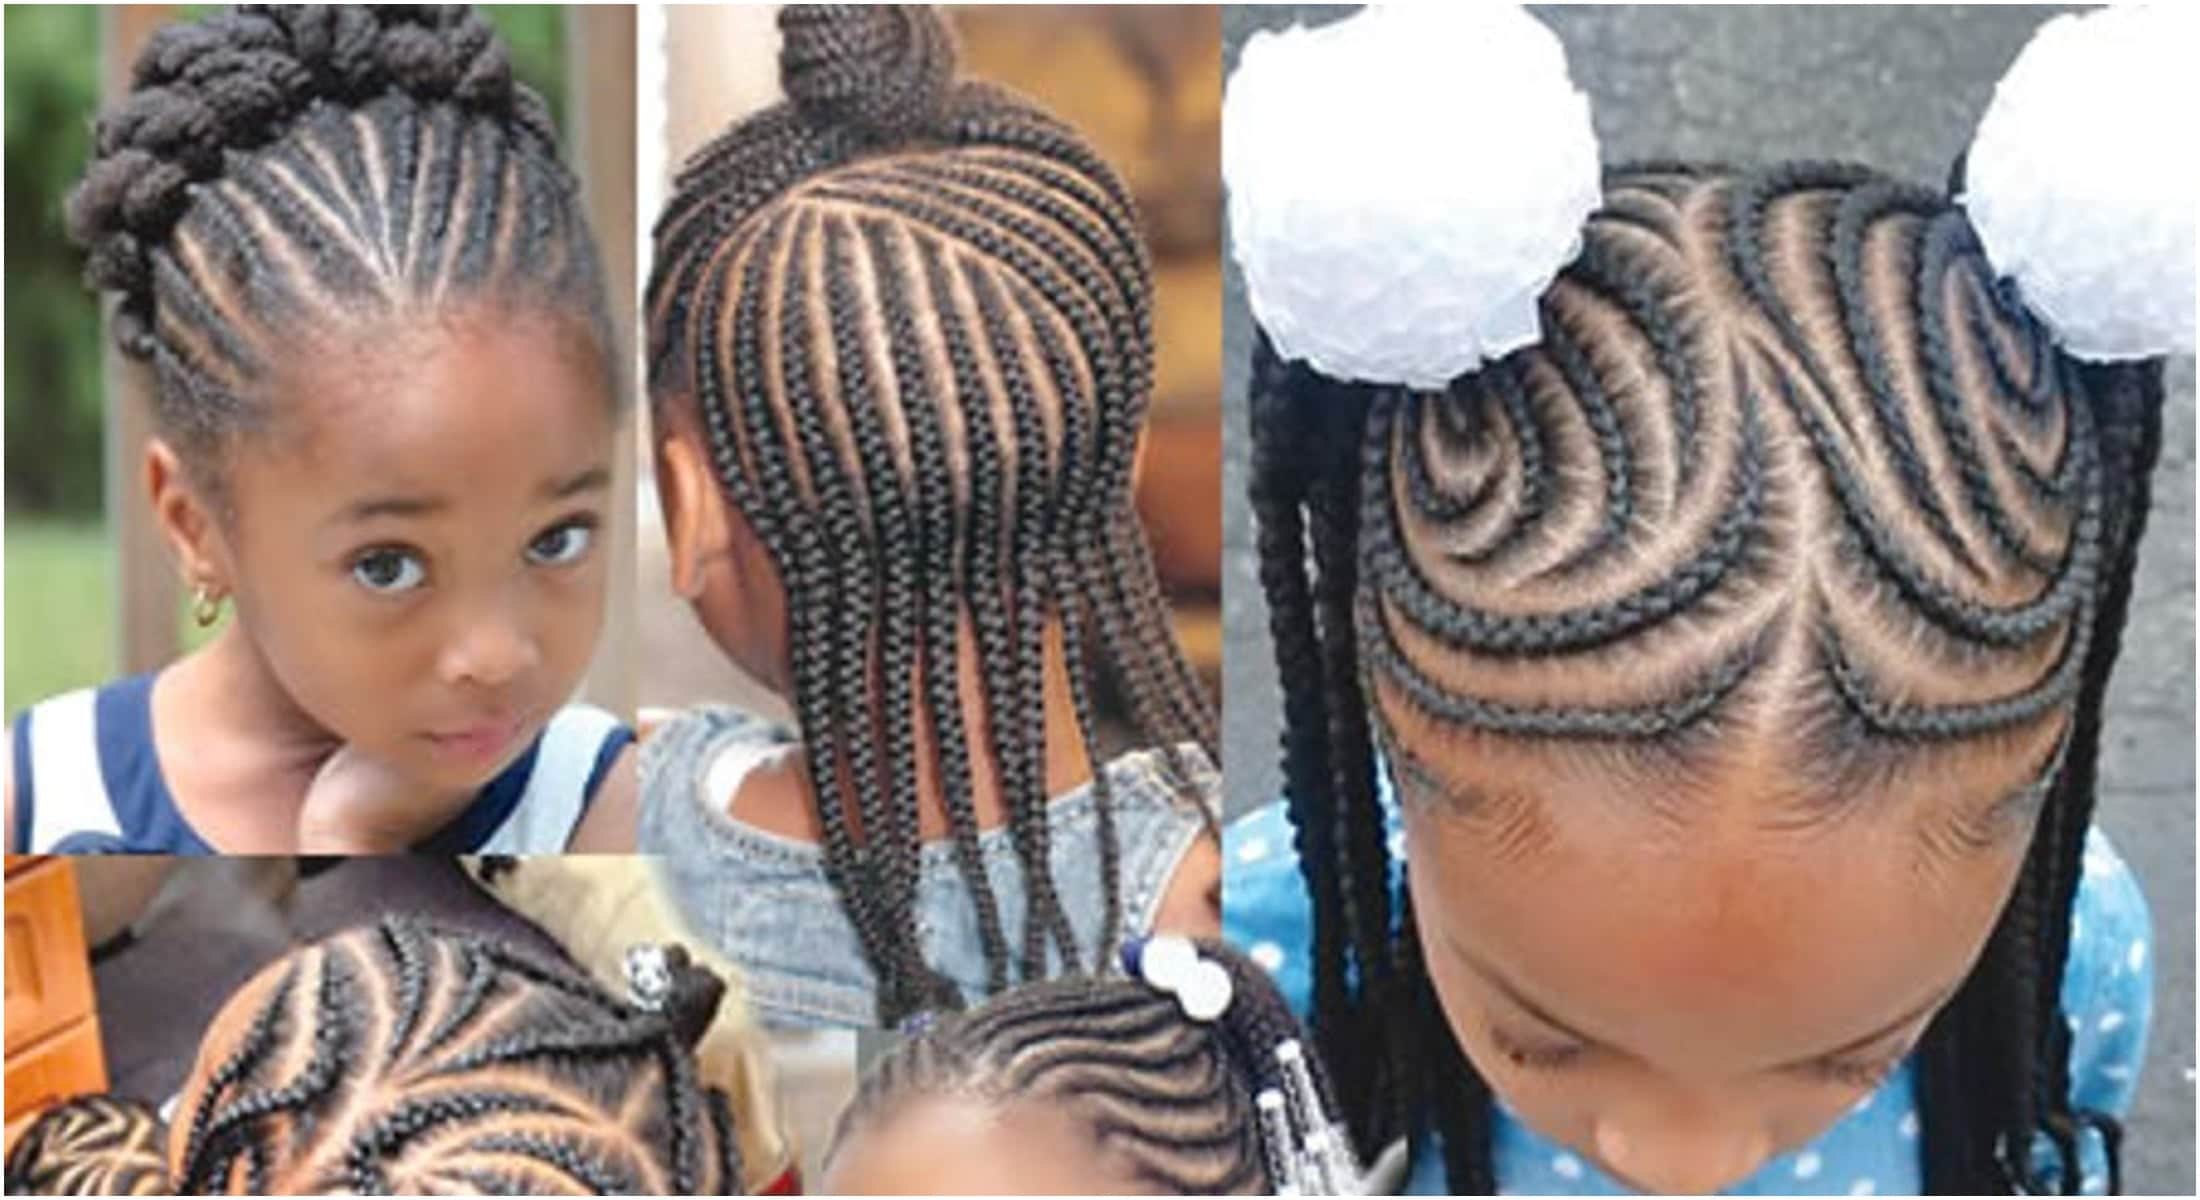 16 Simple and Adorable School Hairstyle for Girls